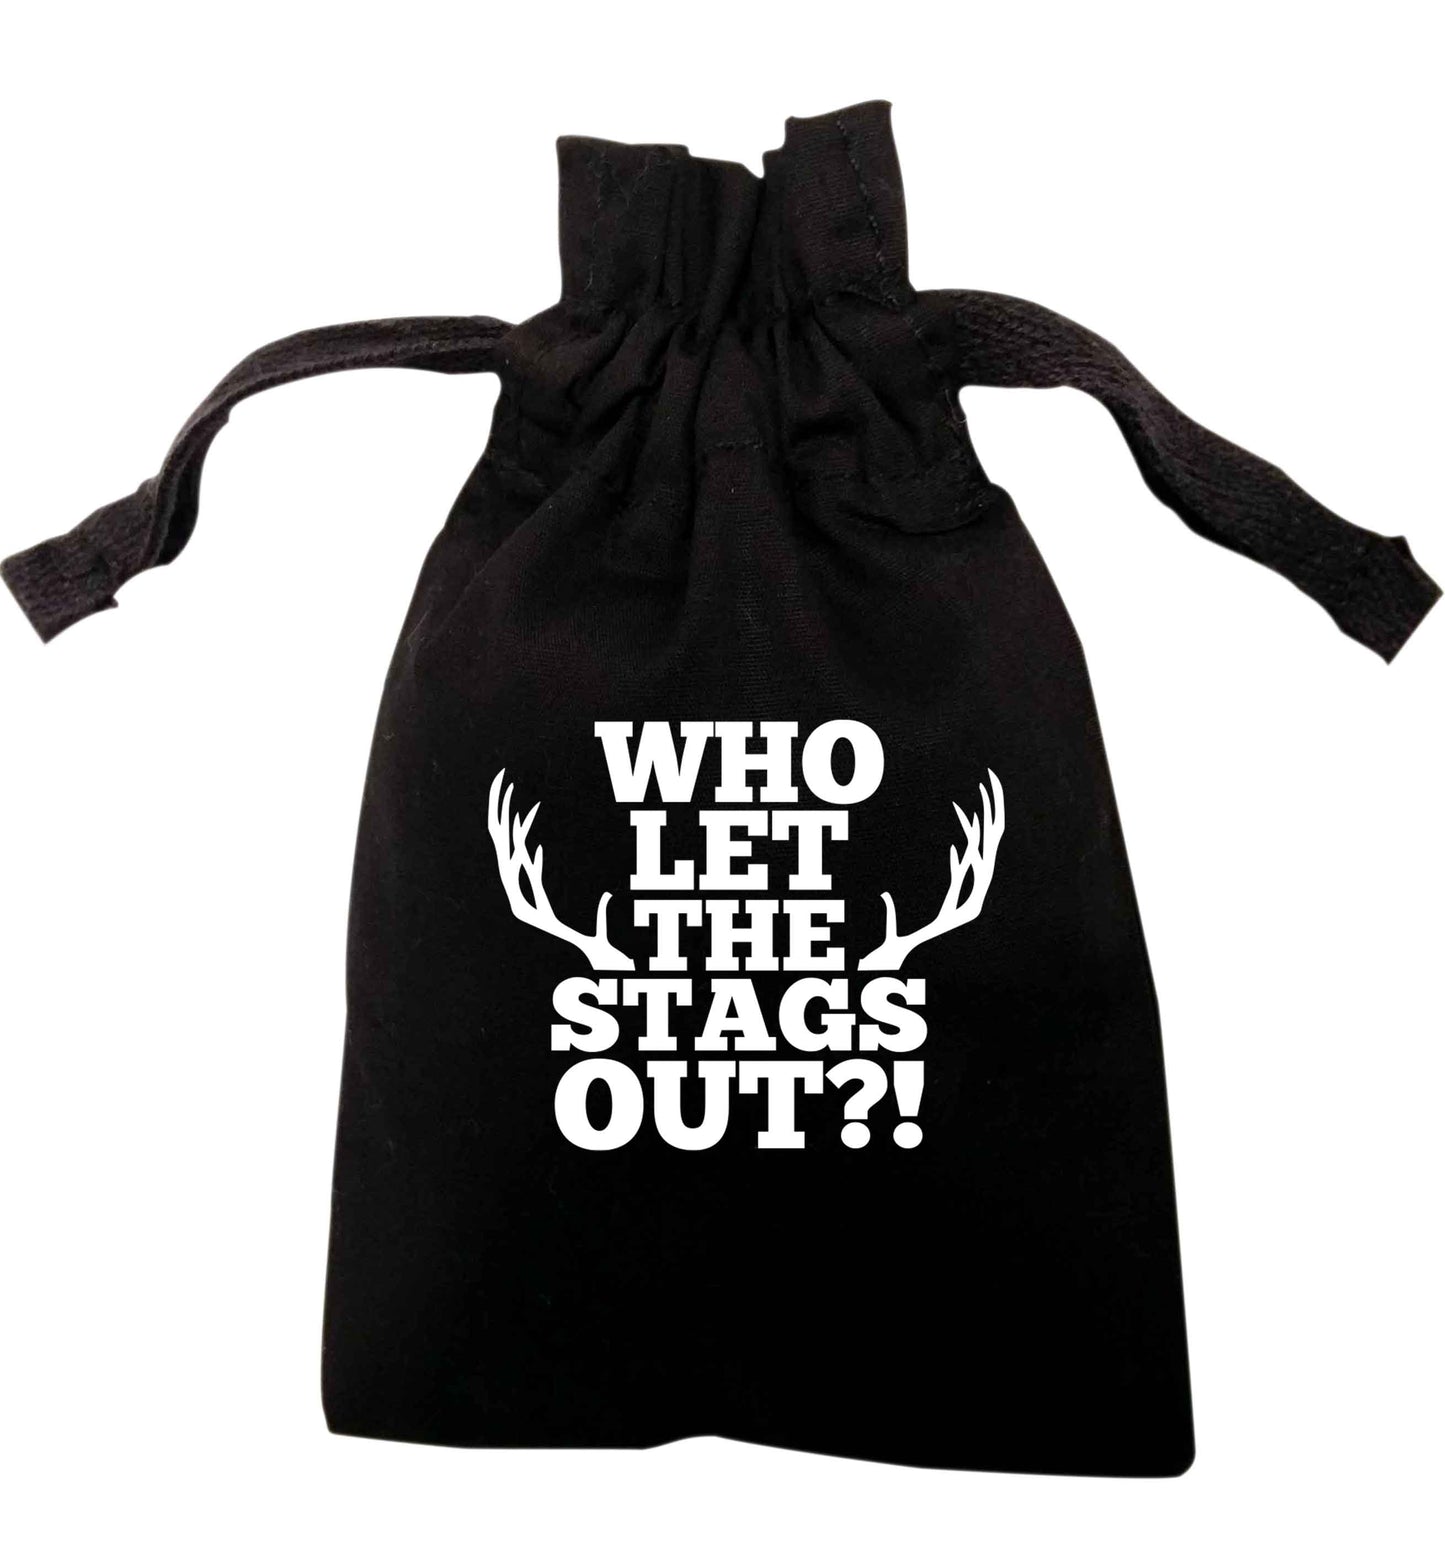 Who let the stags out | XS - L | Pouch / Drawstring bag / Sack | Organic Cotton | Bulk discounts available!